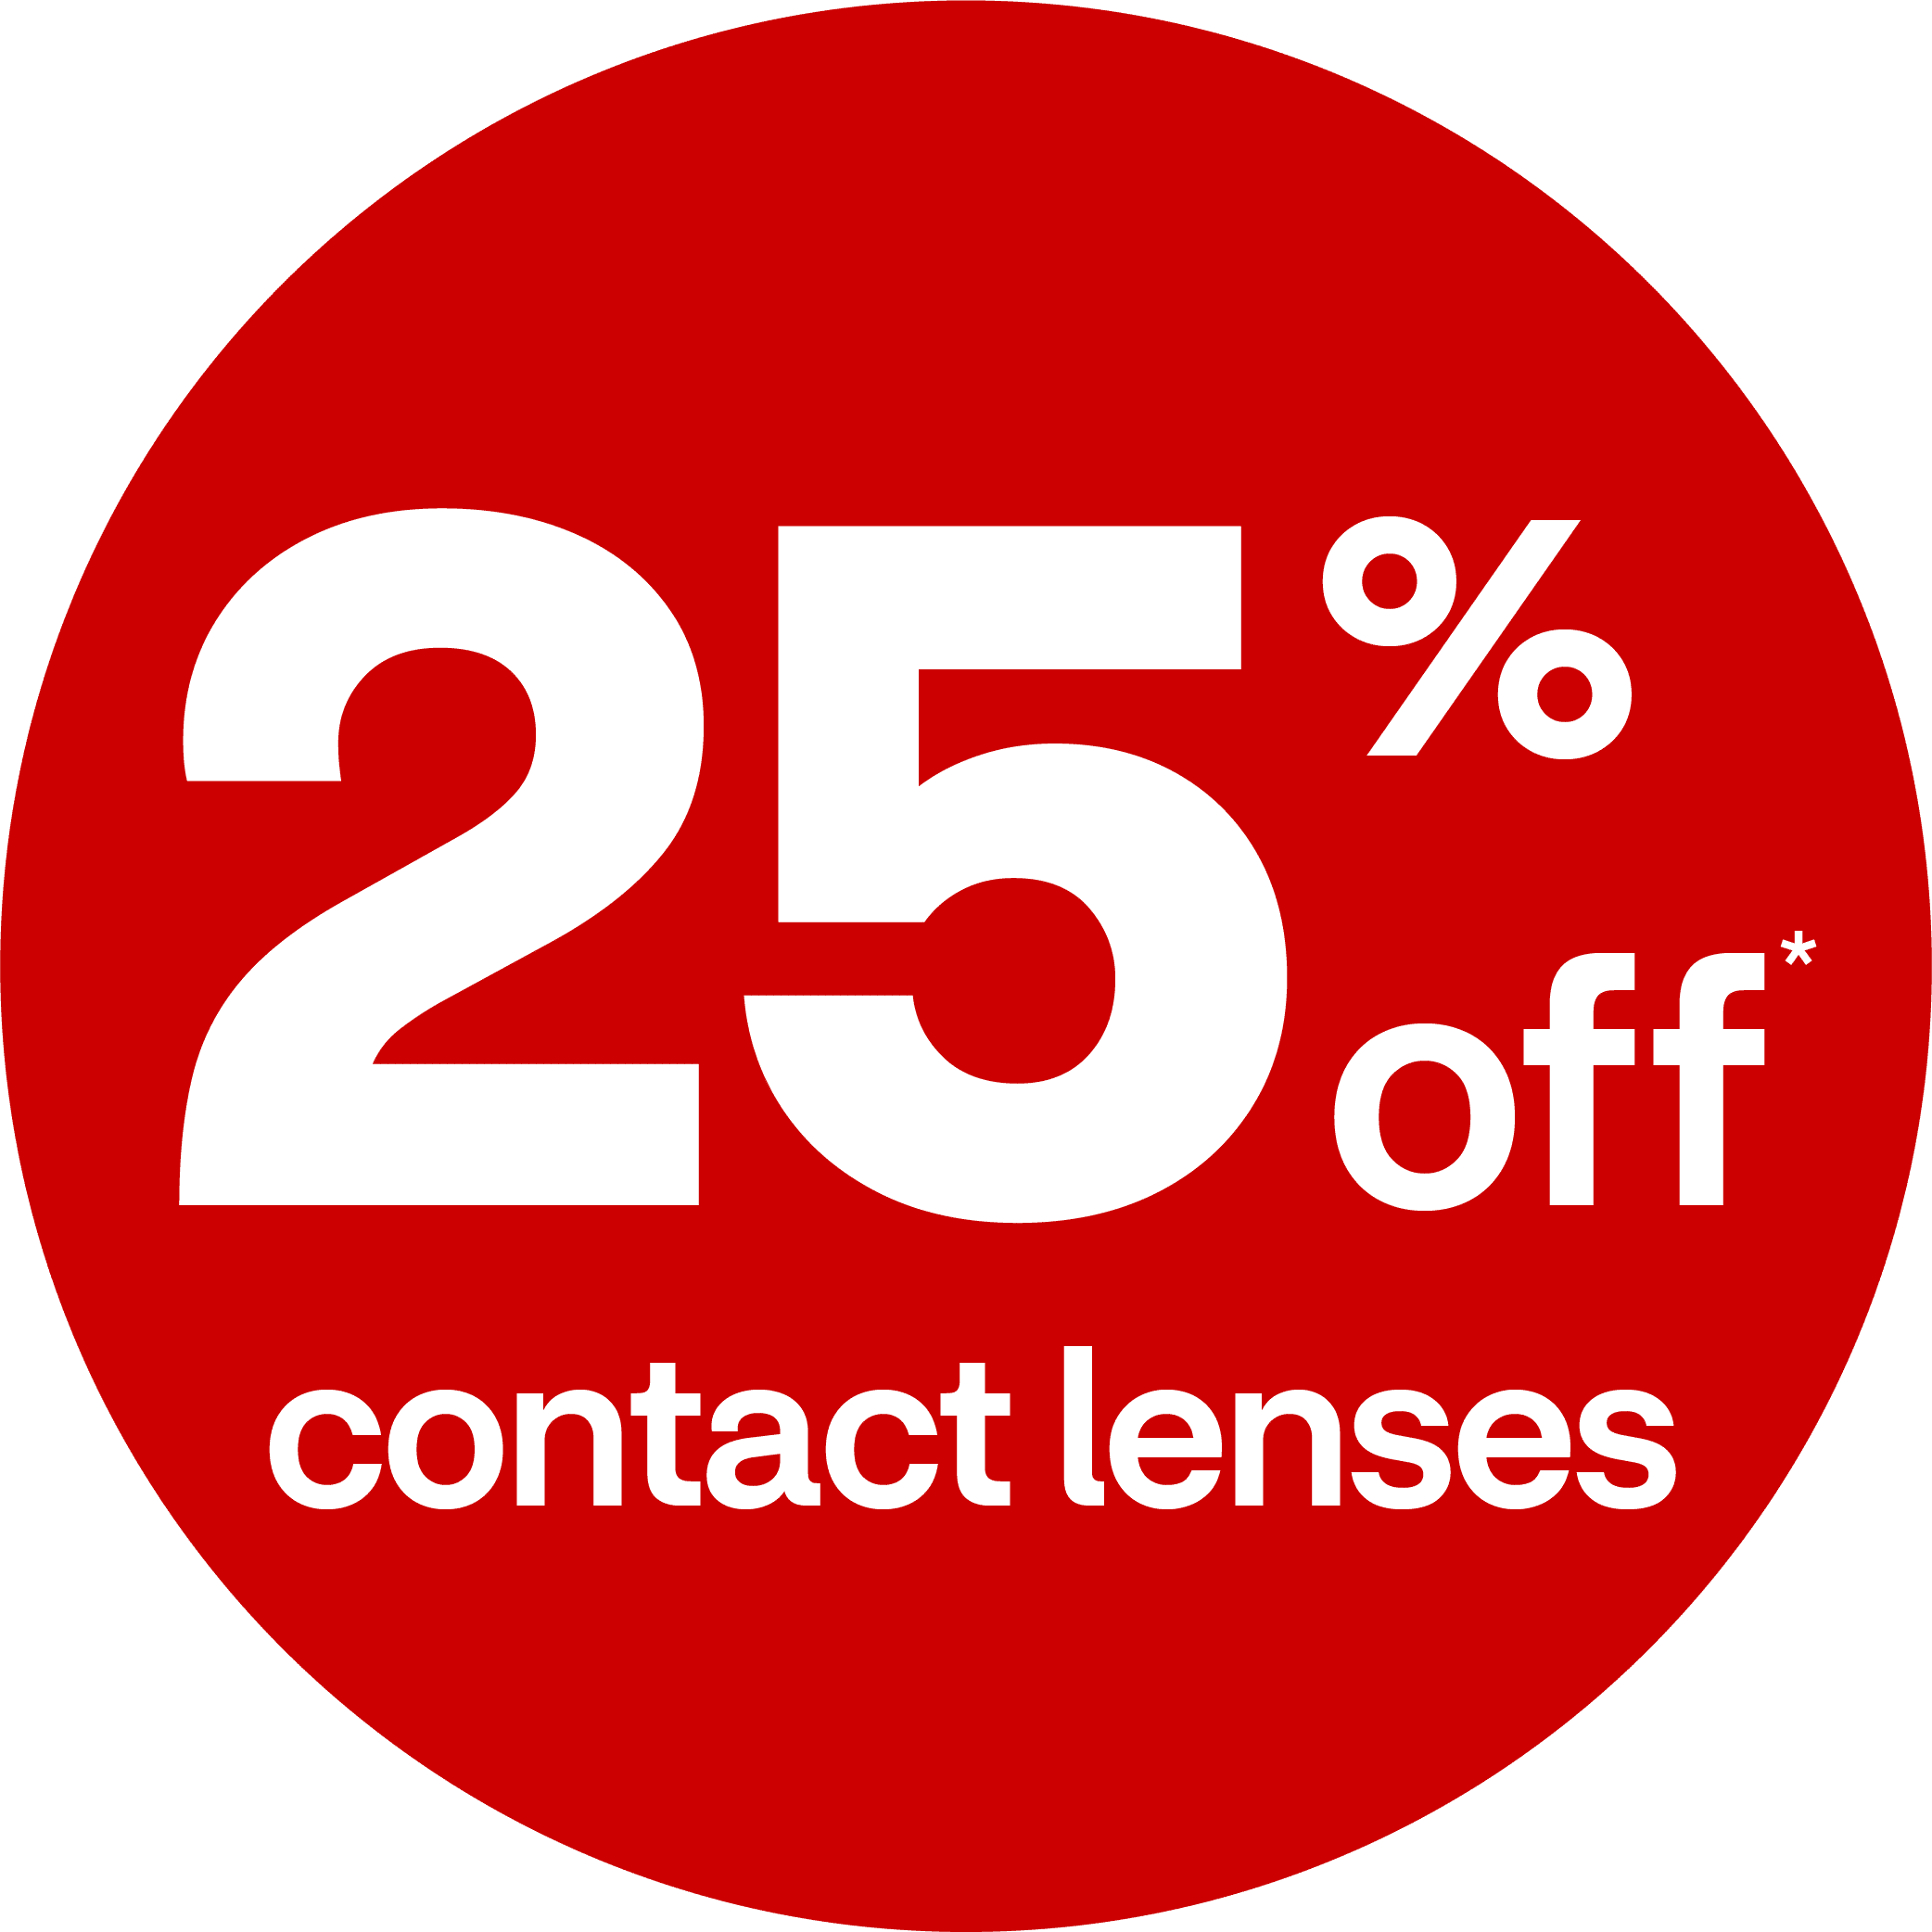 Shop for contact lenses at up to 25 percent off*